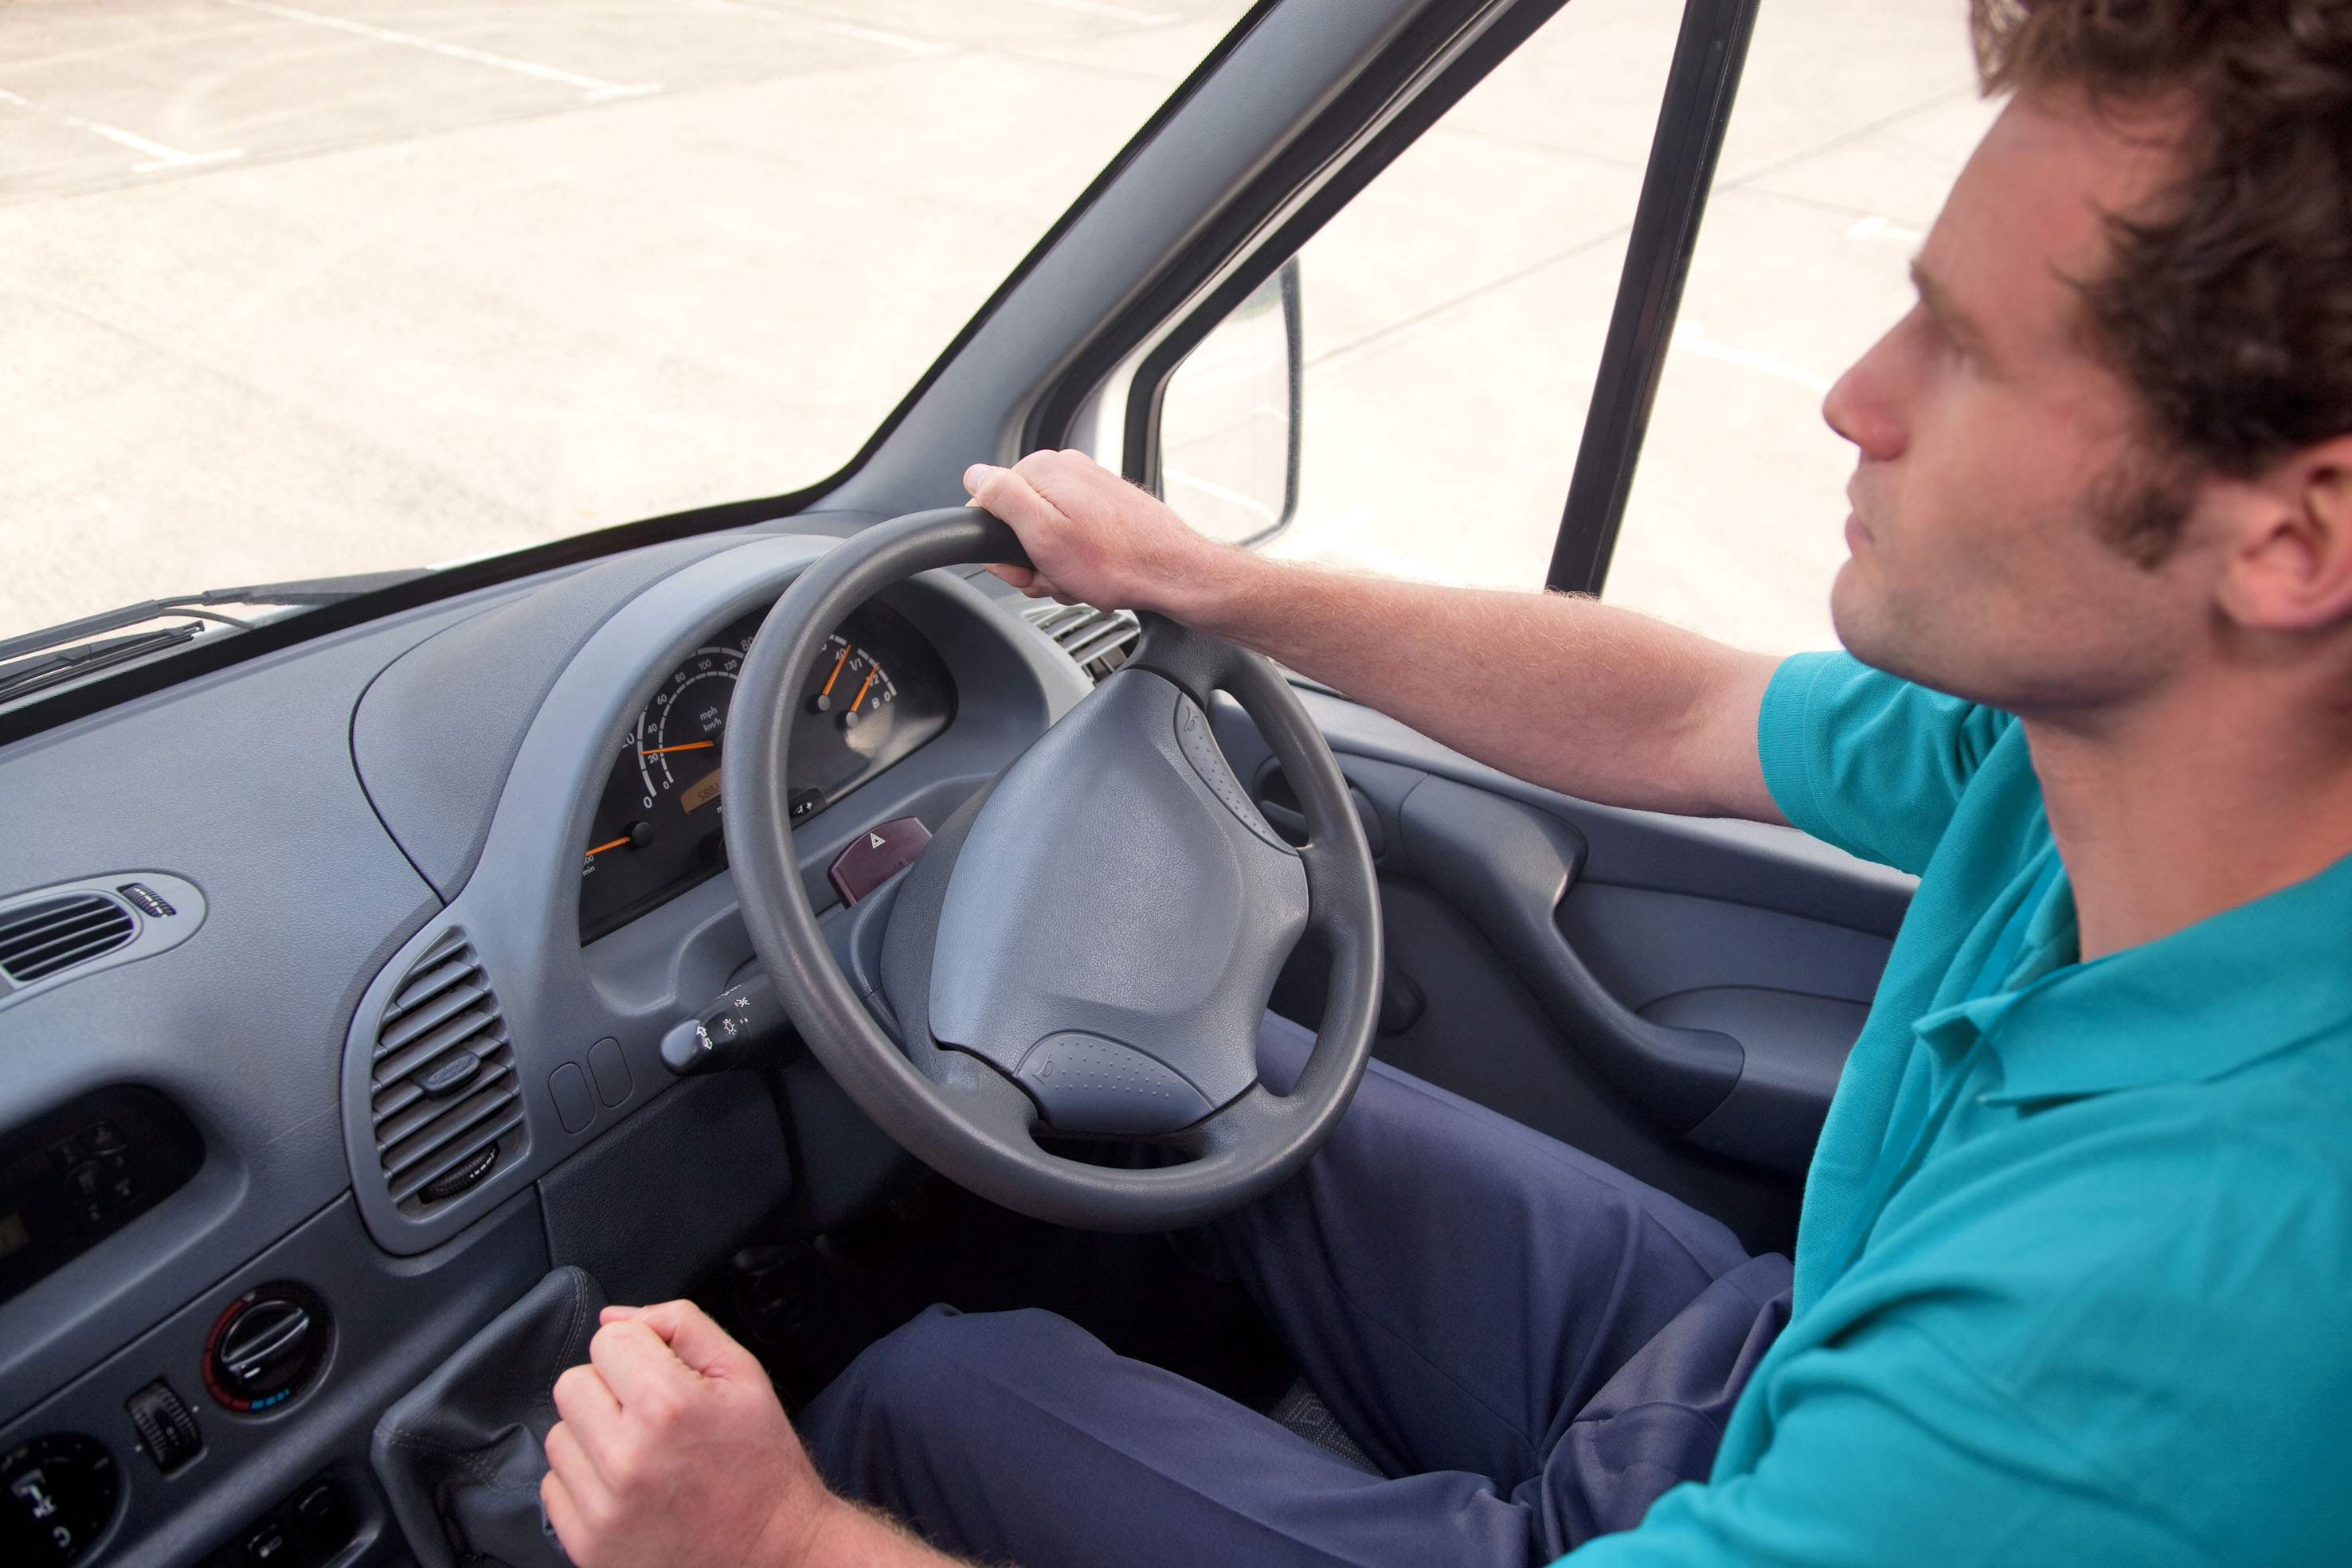 Van drivers challenge “undeserved reputation” in new study